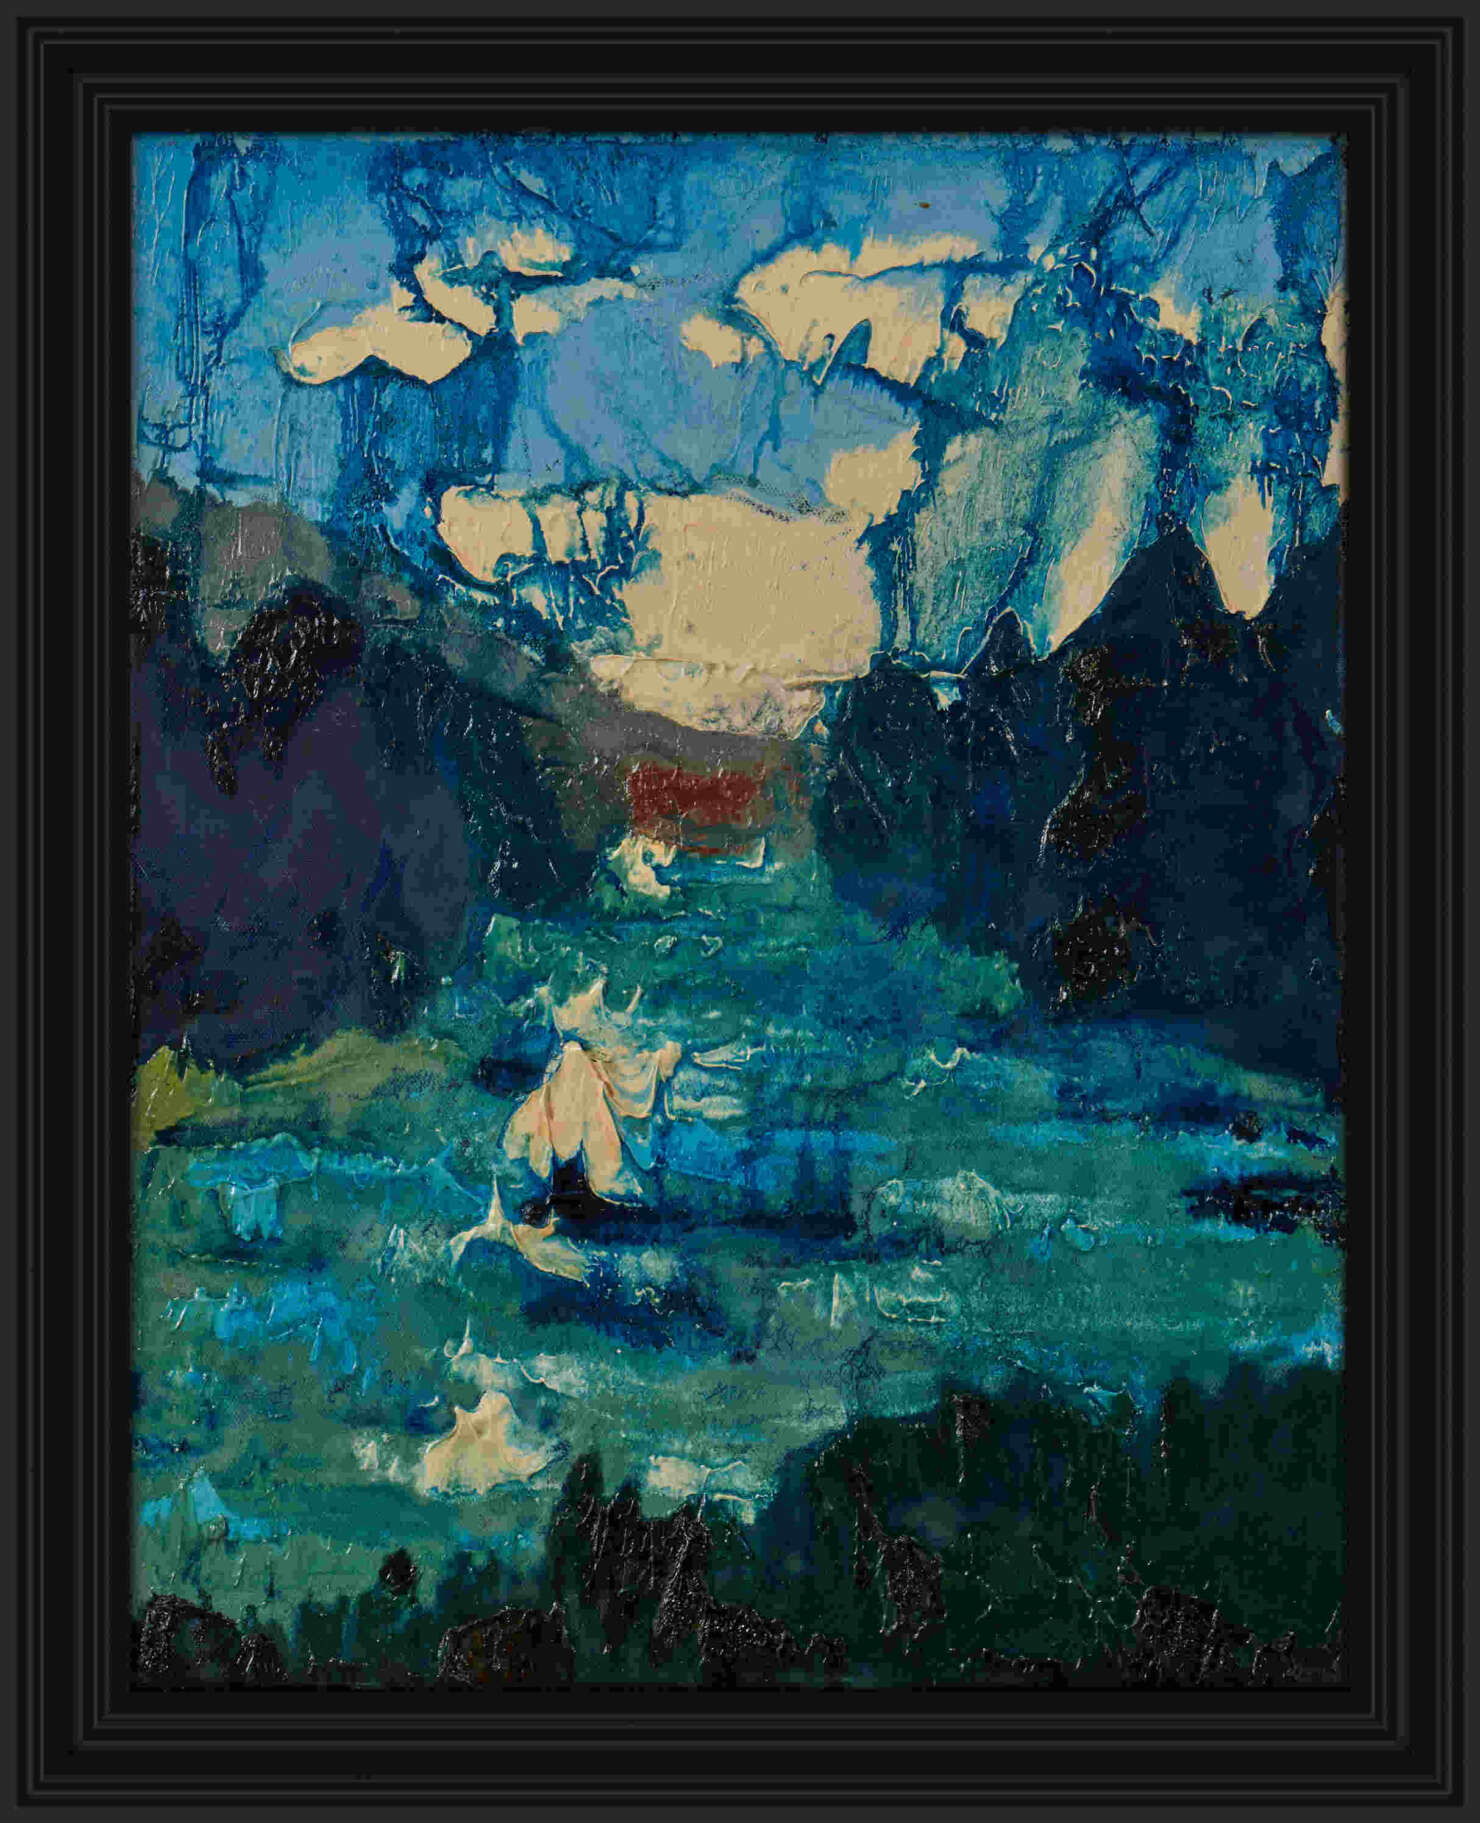 artist rod coyne's landscape painting "The Meetings" is shown here, in a black frame.